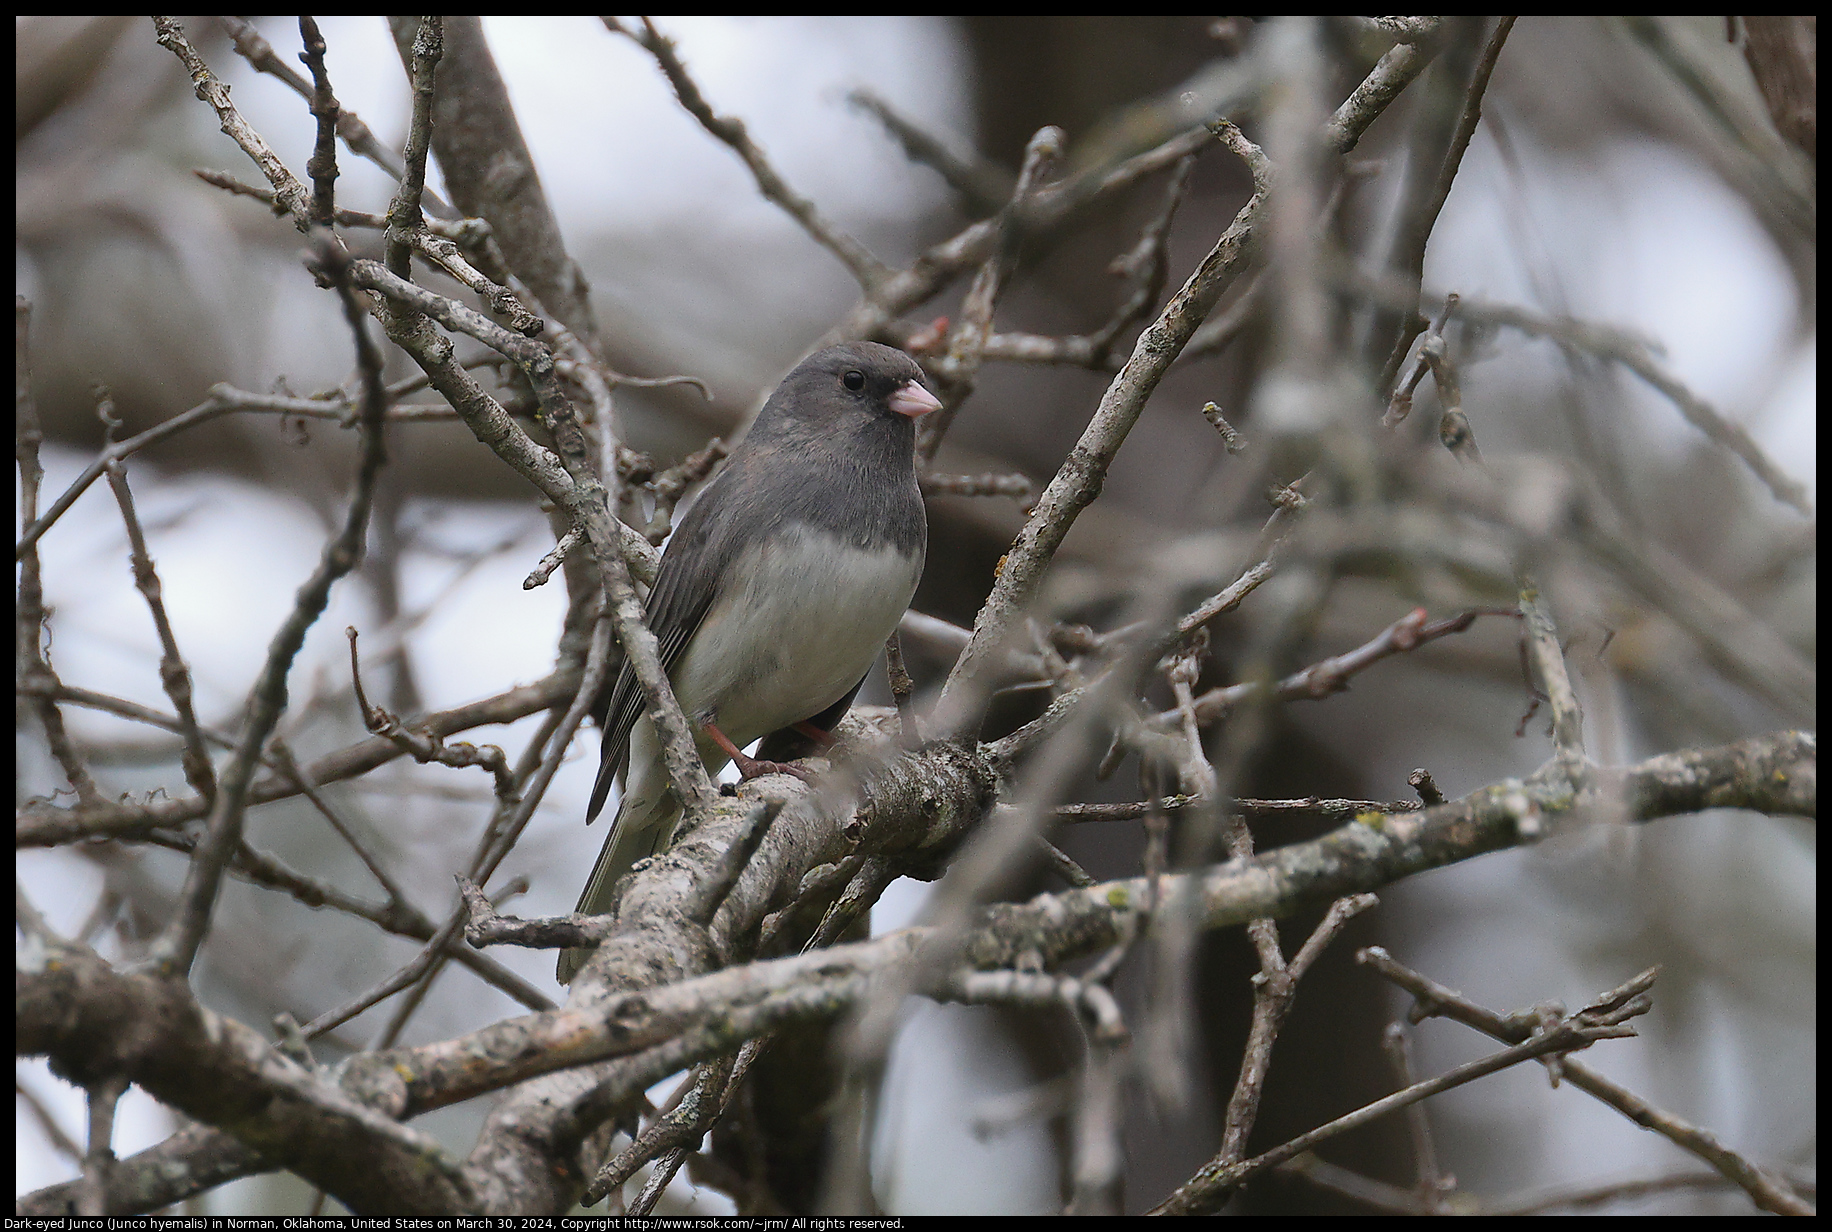 Dark-eyed Junco (Junco hyemalis) in Norman, Oklahoma, United States on March 30, 2024